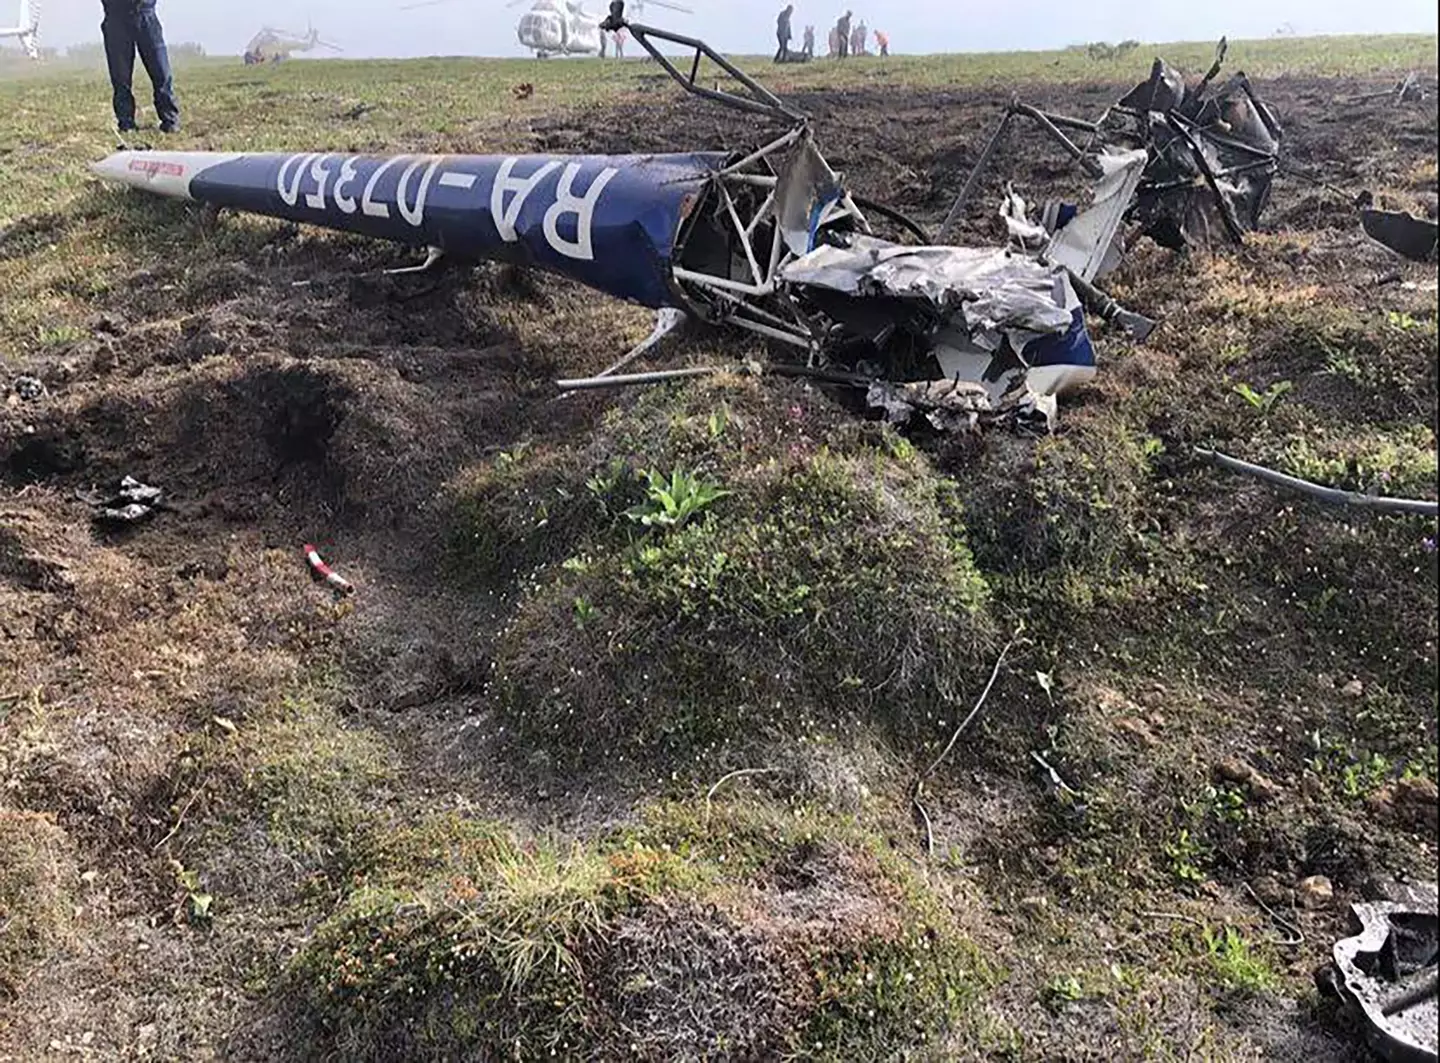 The crashed helicopter was found a day later.